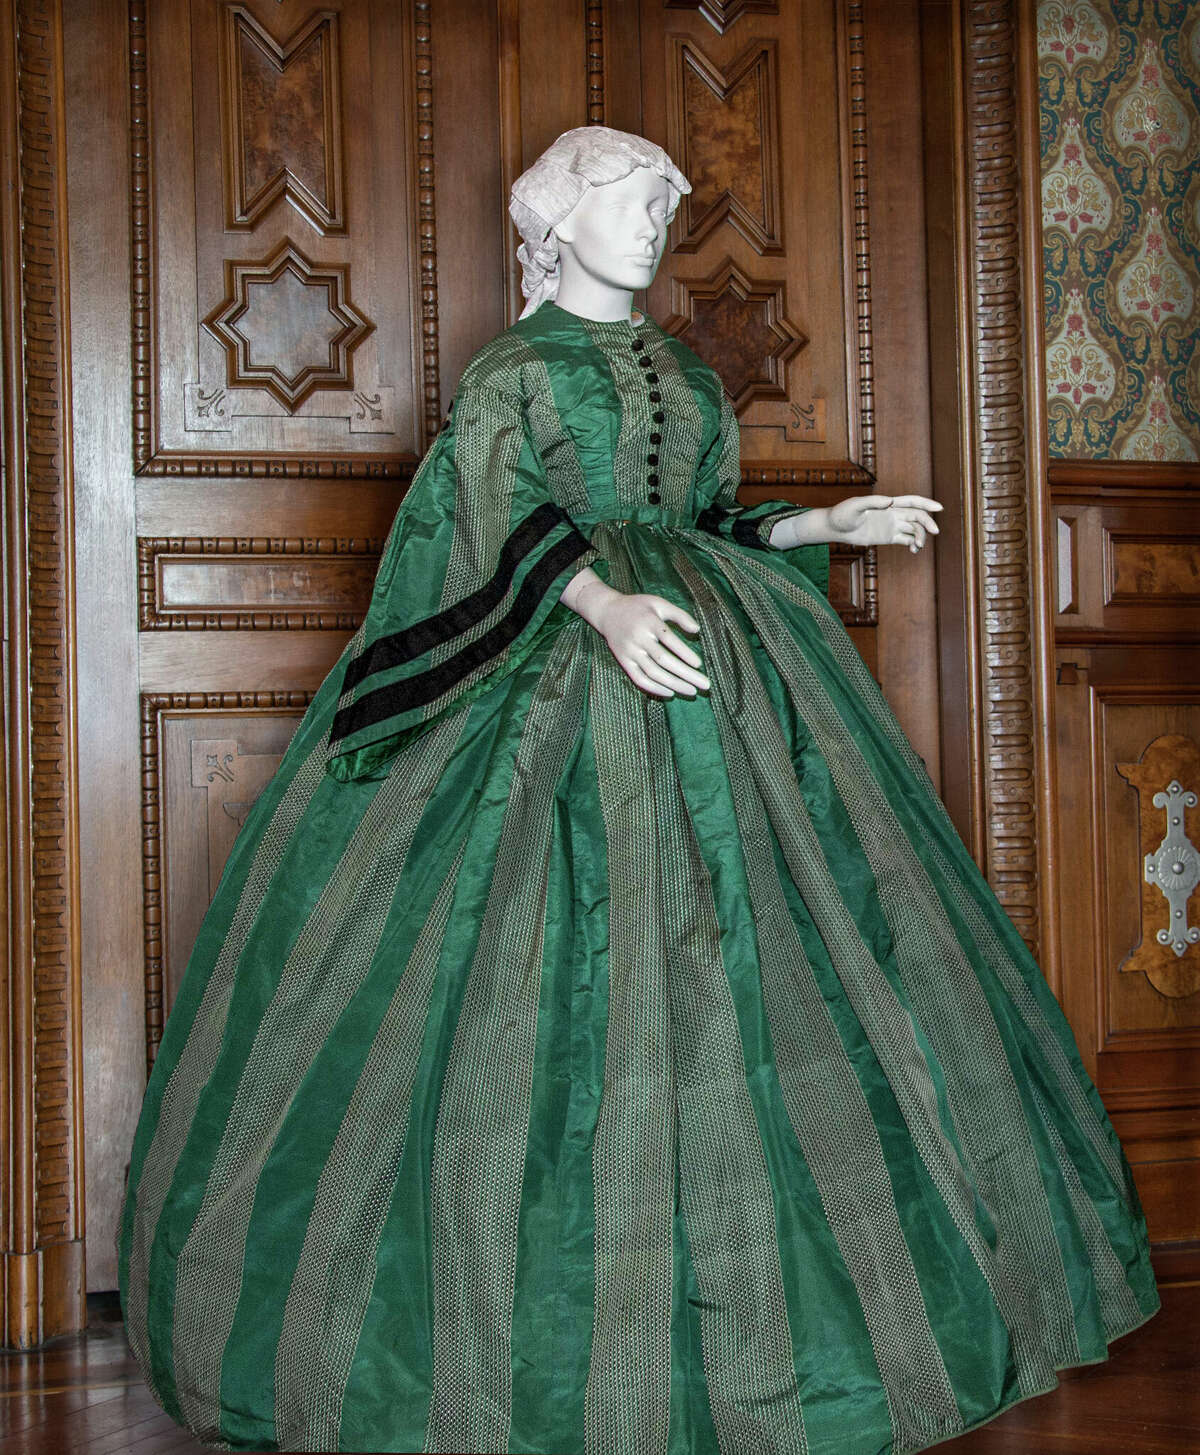 The museum will open a new exhibit titled "Making It Last: Sustainable Fashion in Victorian America" starting May 19. 